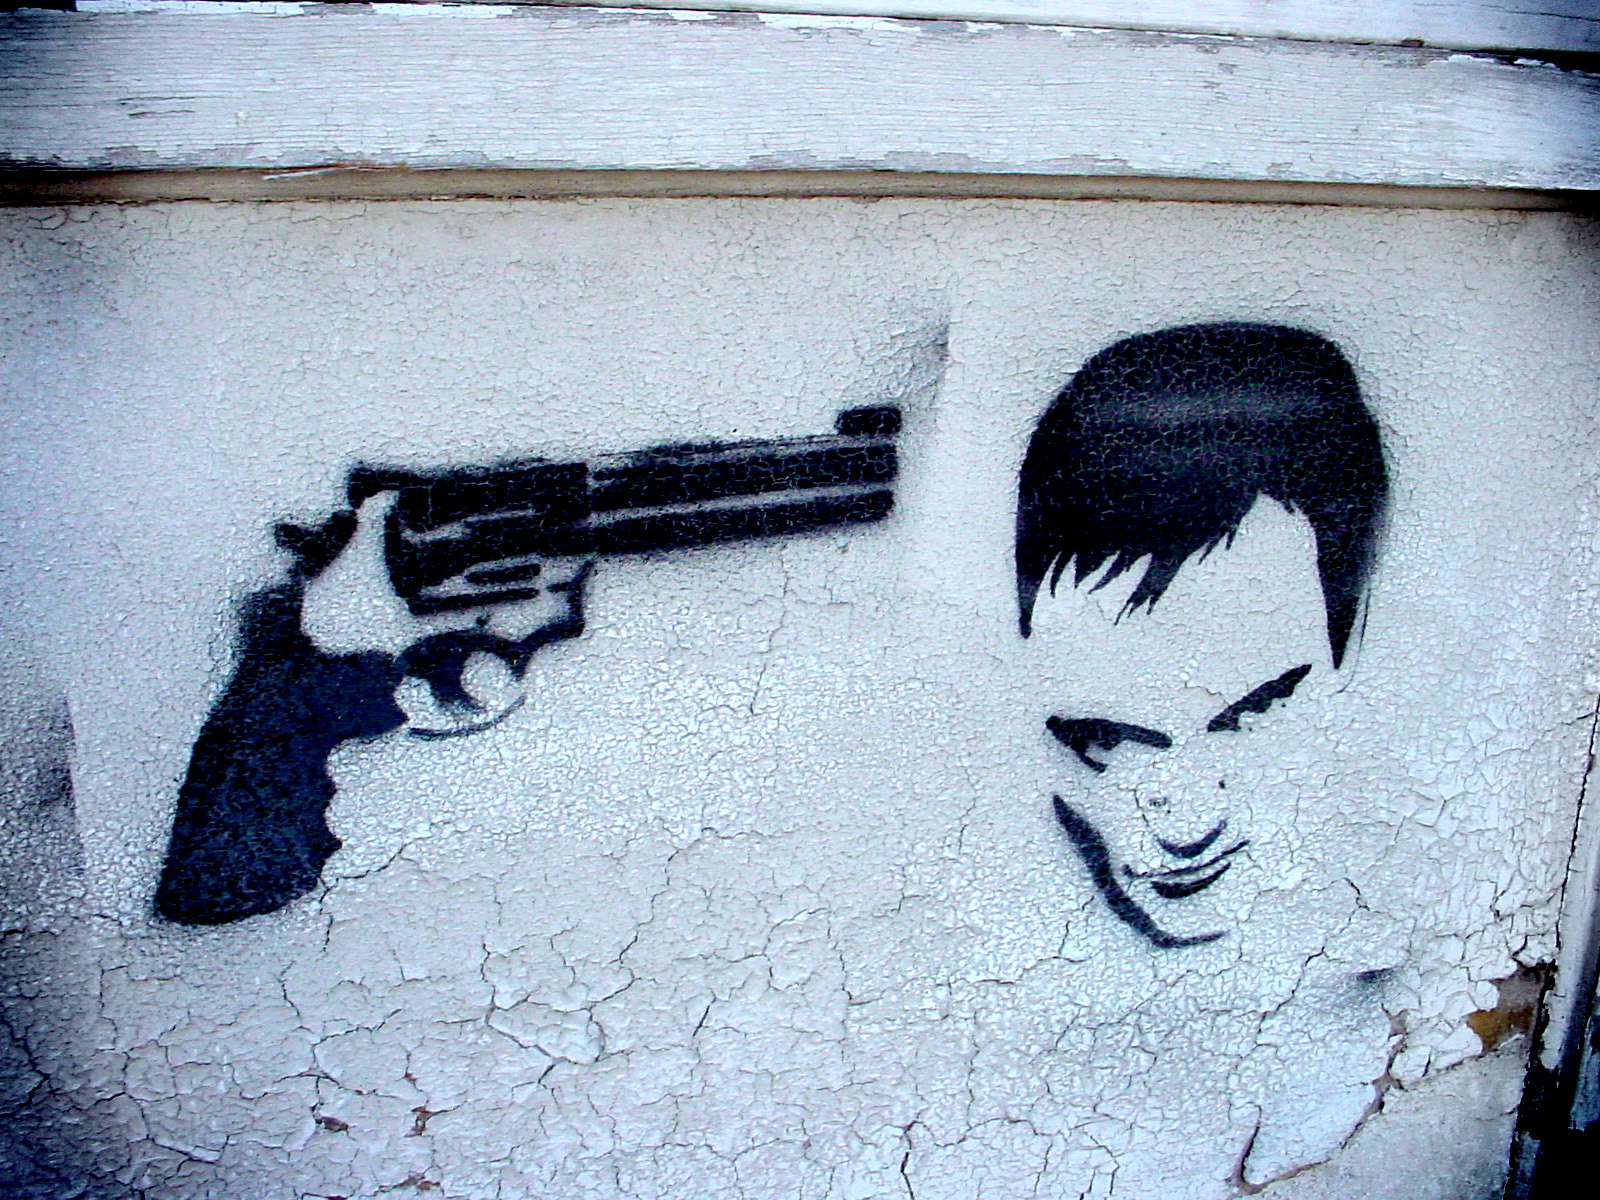 the spray - painted wall with the graffiti of the gun and a picture of the actor from the hit movie scarfp